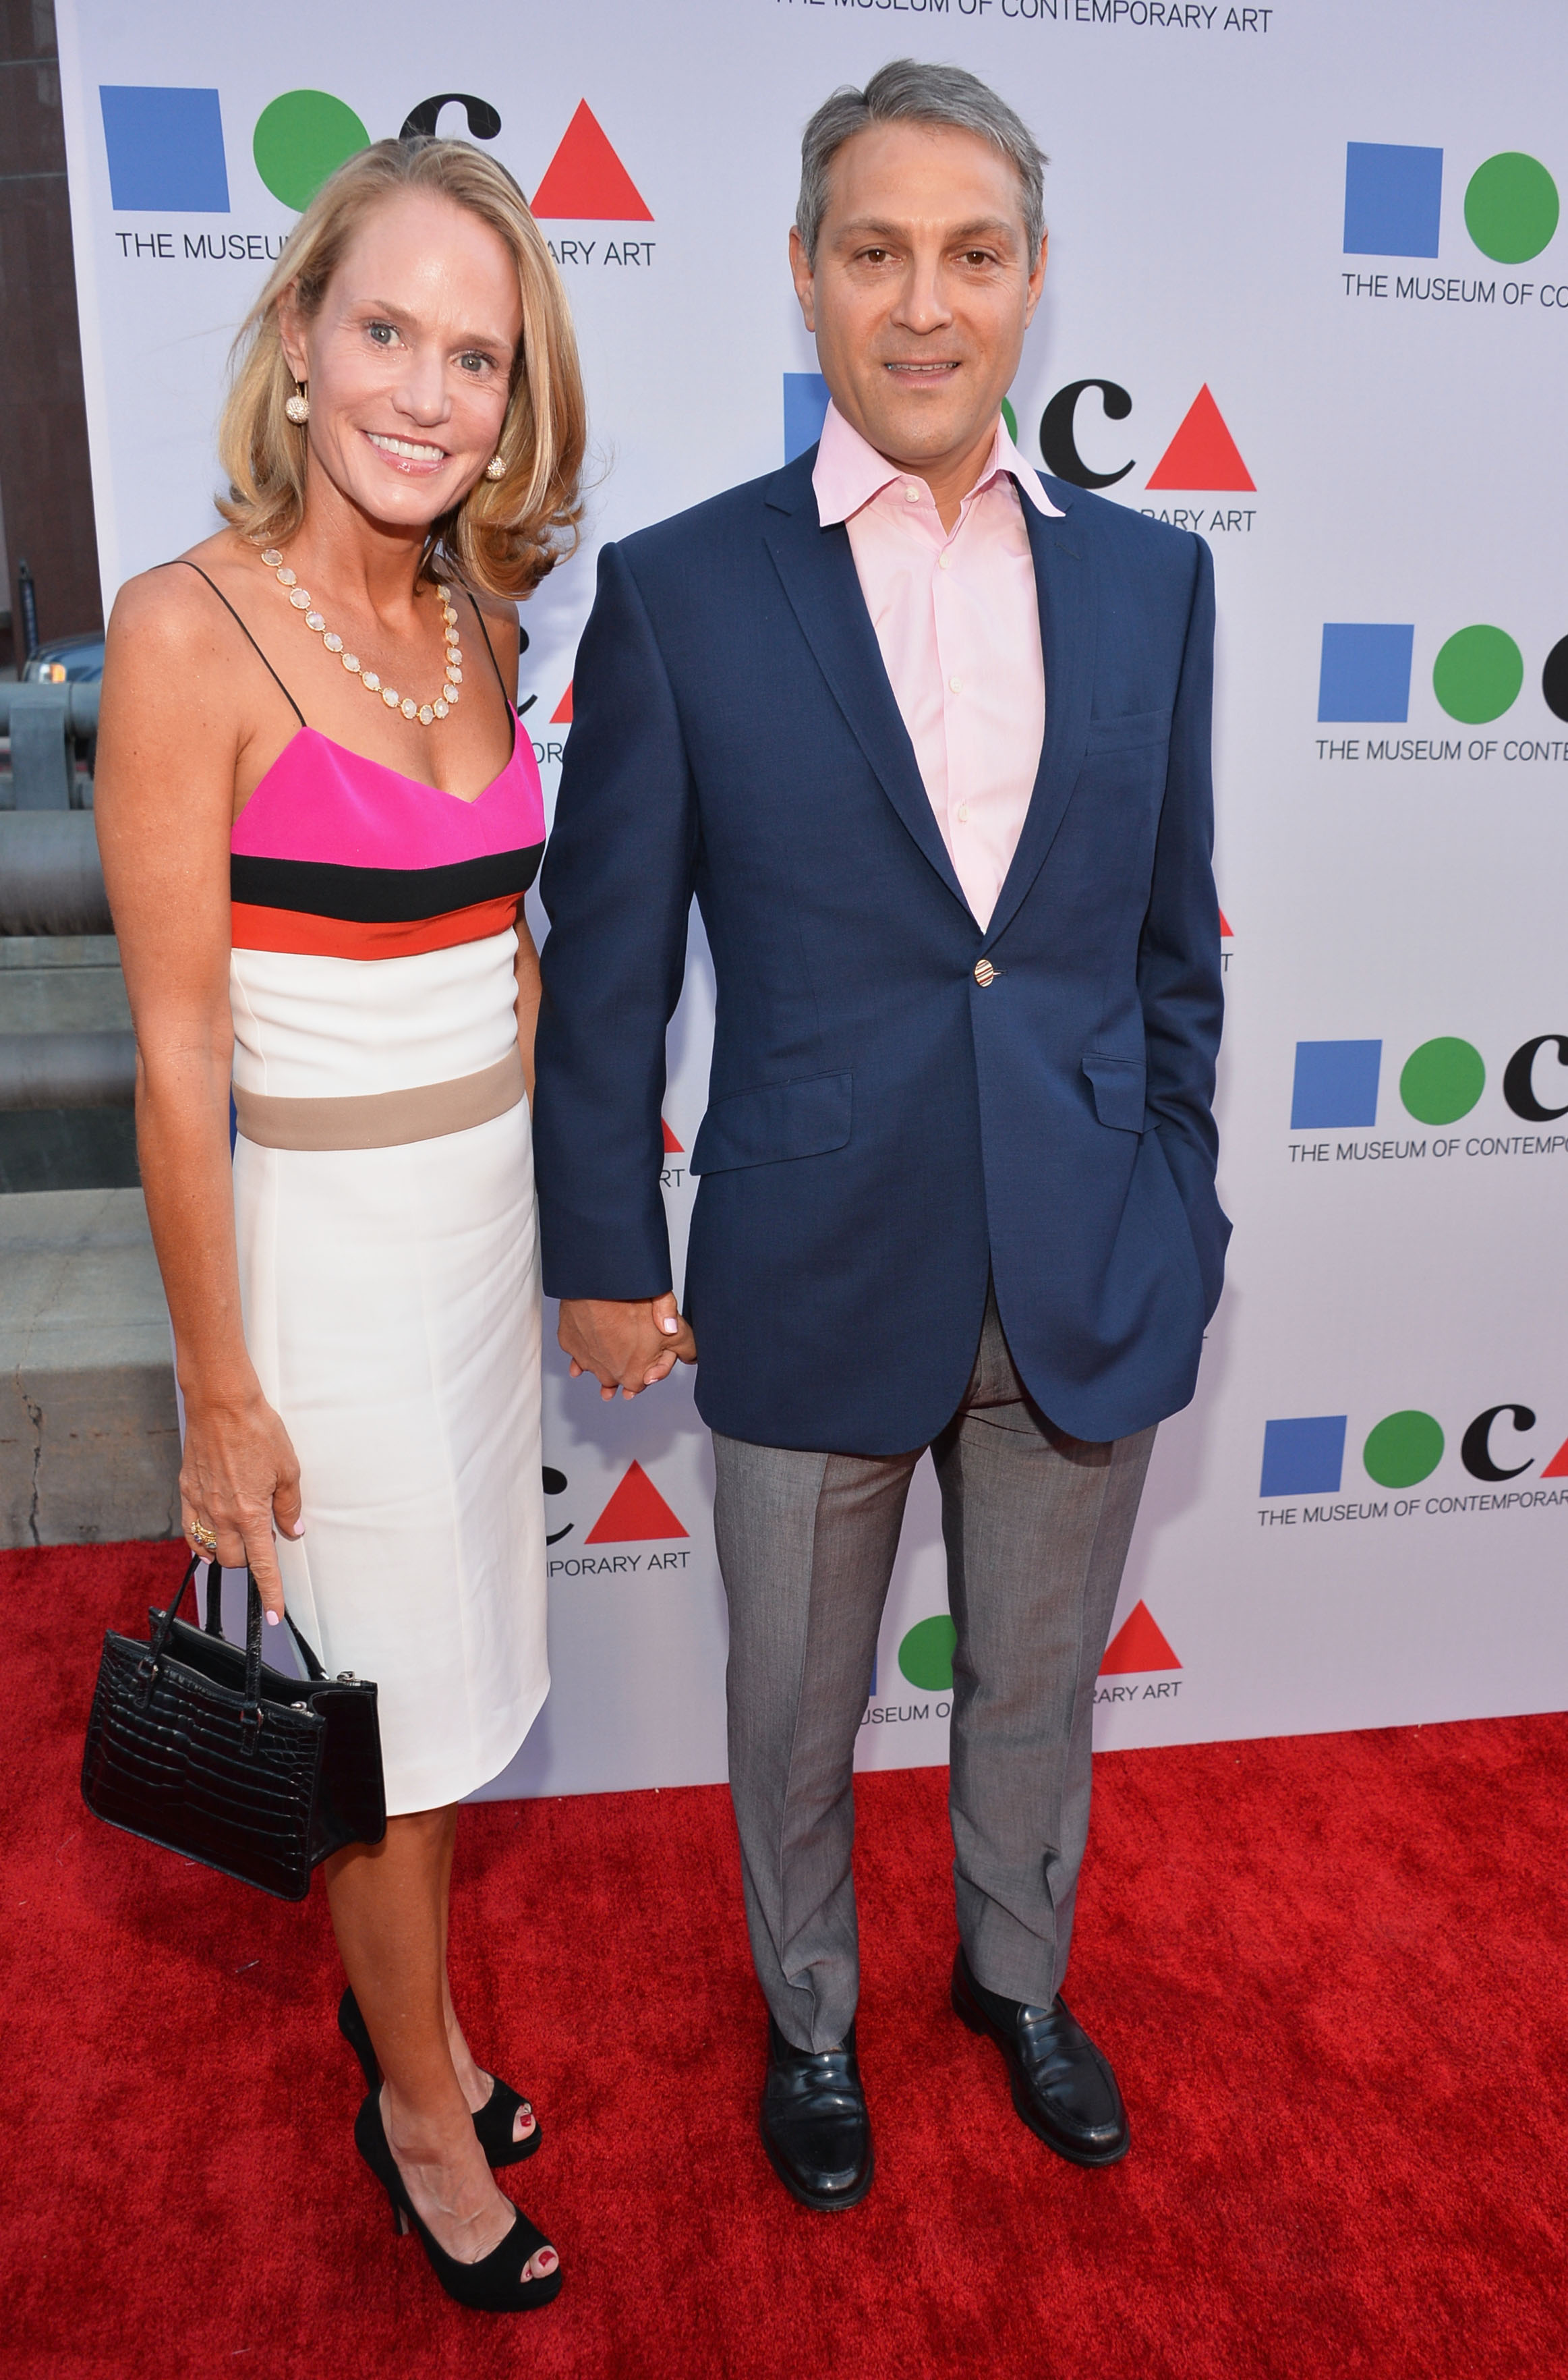 Sarah Addington and Ari Emanuel attend the Yesssss! MOCA Gala 2013, Celebrating the Opening of the Exhibition Urs Fischer, at MOCA Grand Avenue and The Geffen Contemporary on April 20, 2013, in Los Angeles, California. | Source: Getty Images